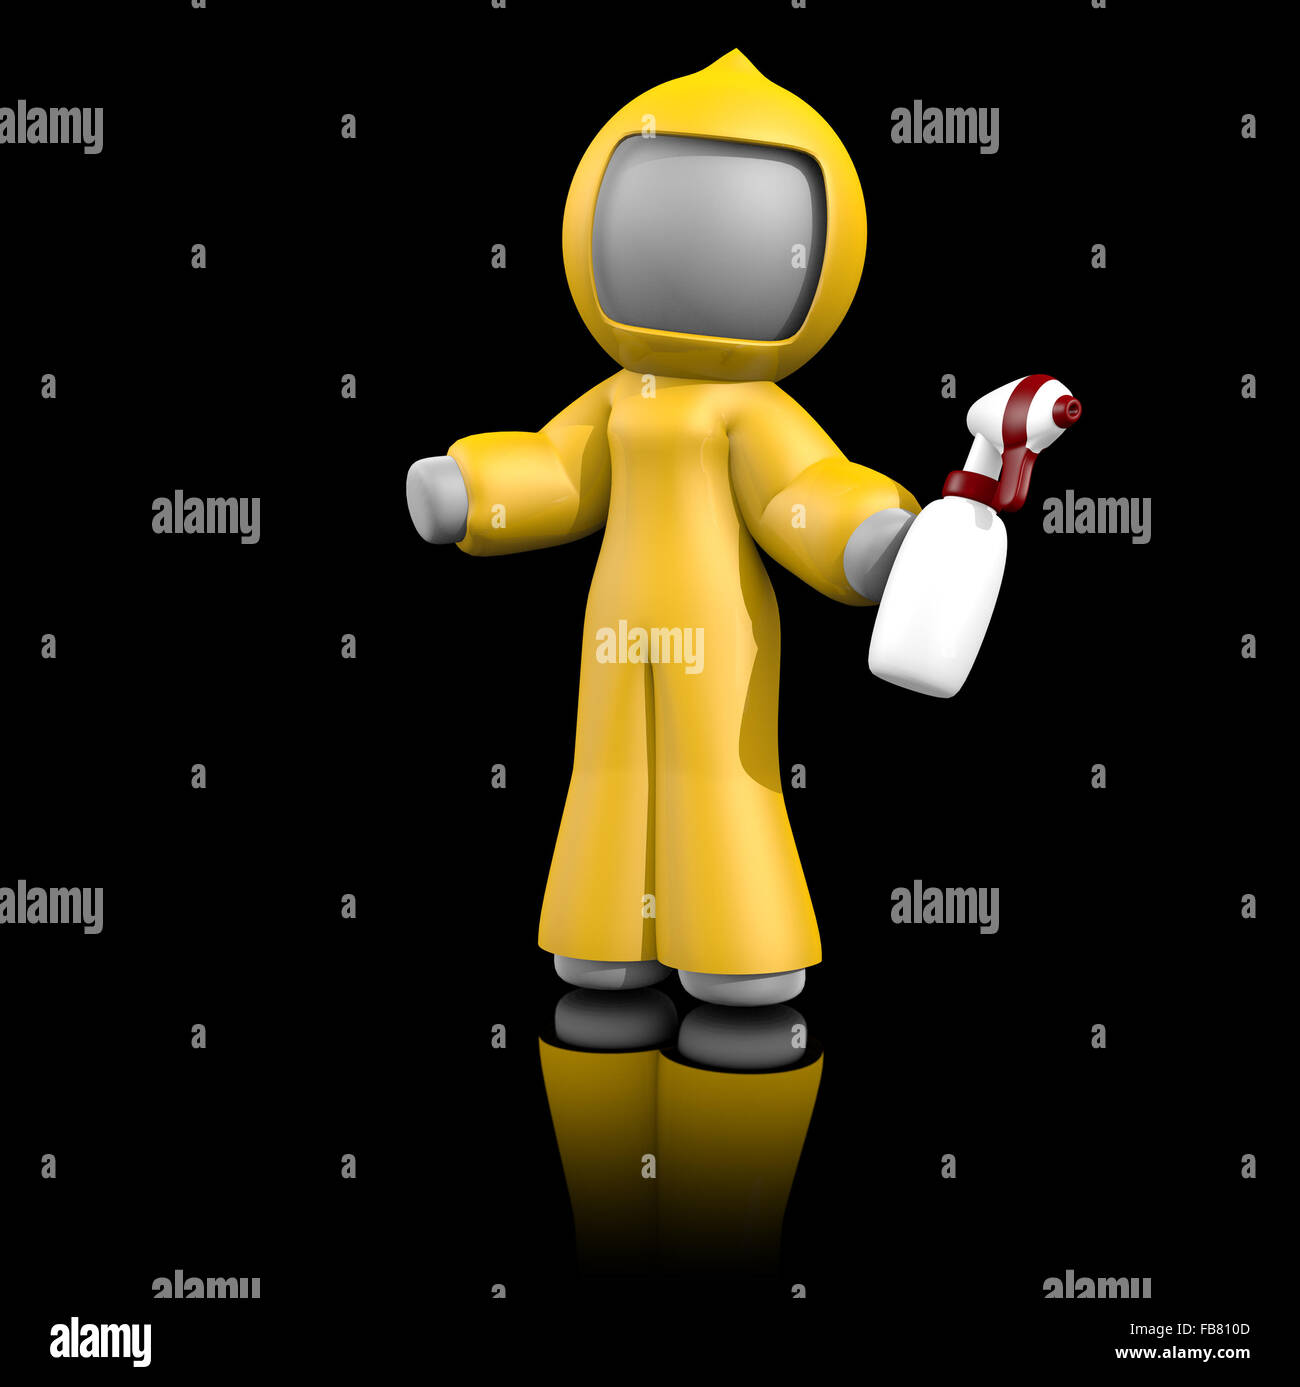 3d lady with sprayer, ready to clean up bio-hazard or disaster area. Yellow suit, red and white sprayer, gray 3d woman! Dark re. Stock Photo